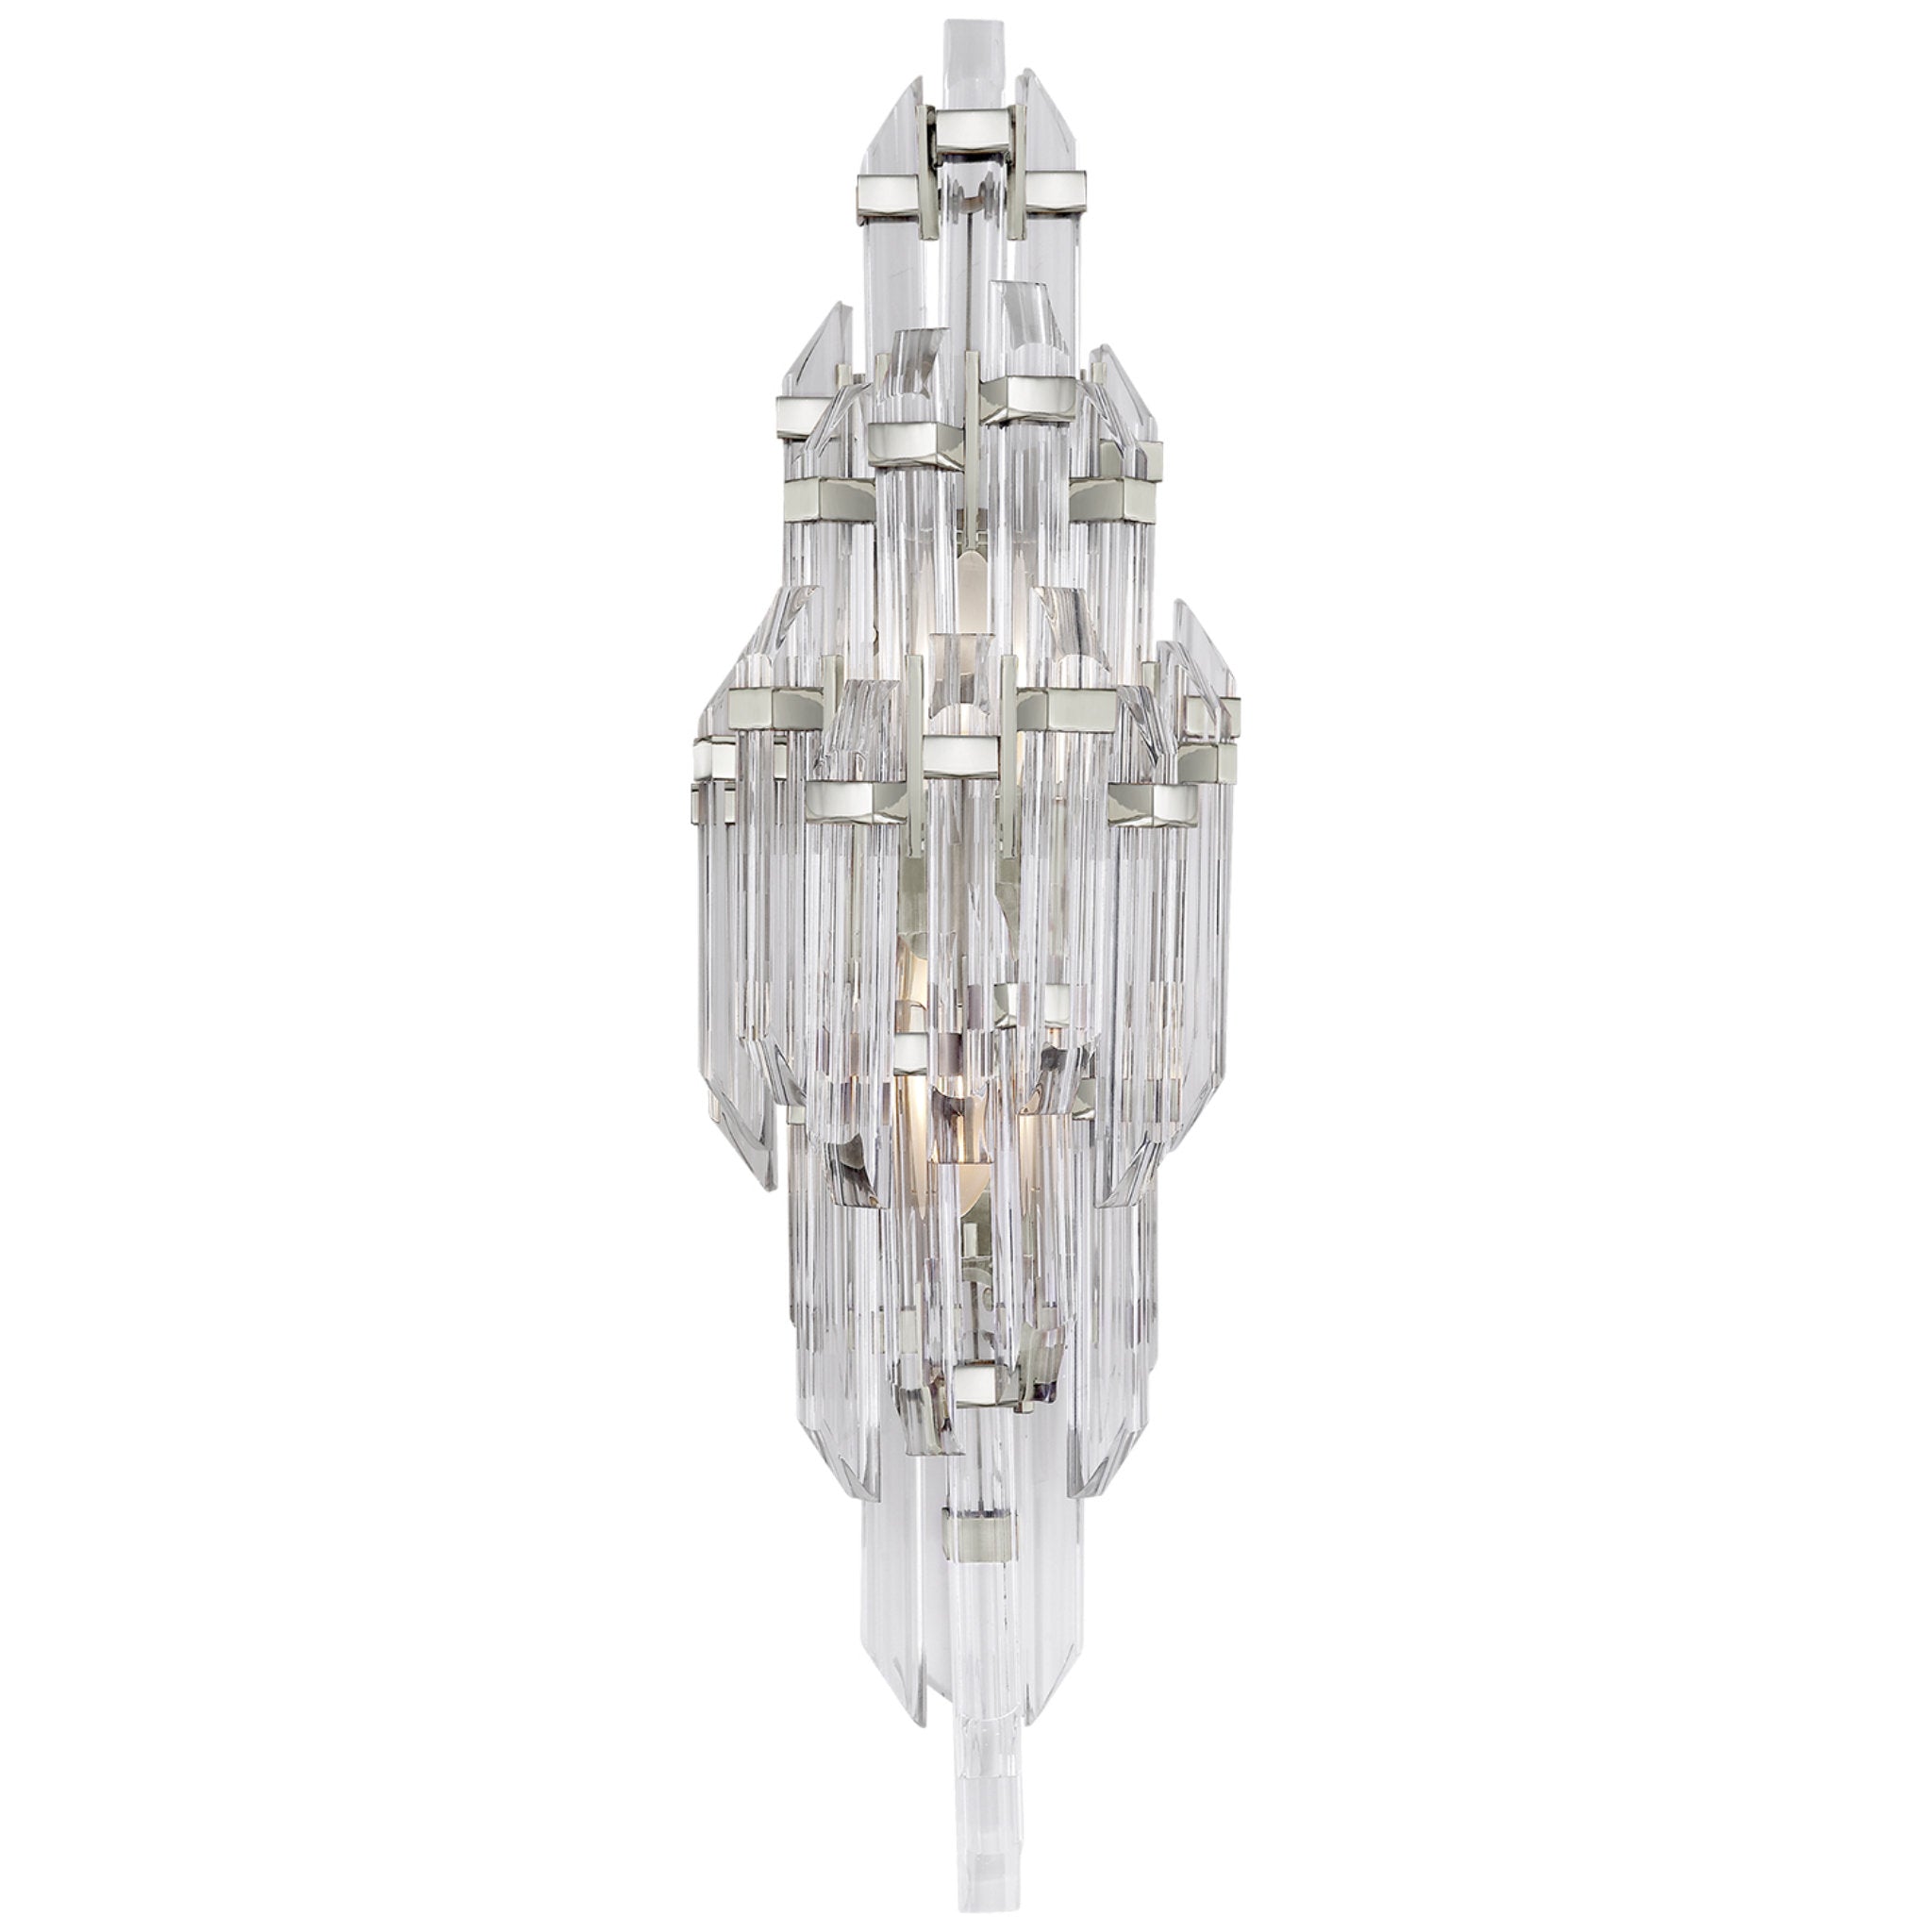 Suzanne Kasler Adele Small Sconce in Polished Nickel with Clear Acrylic